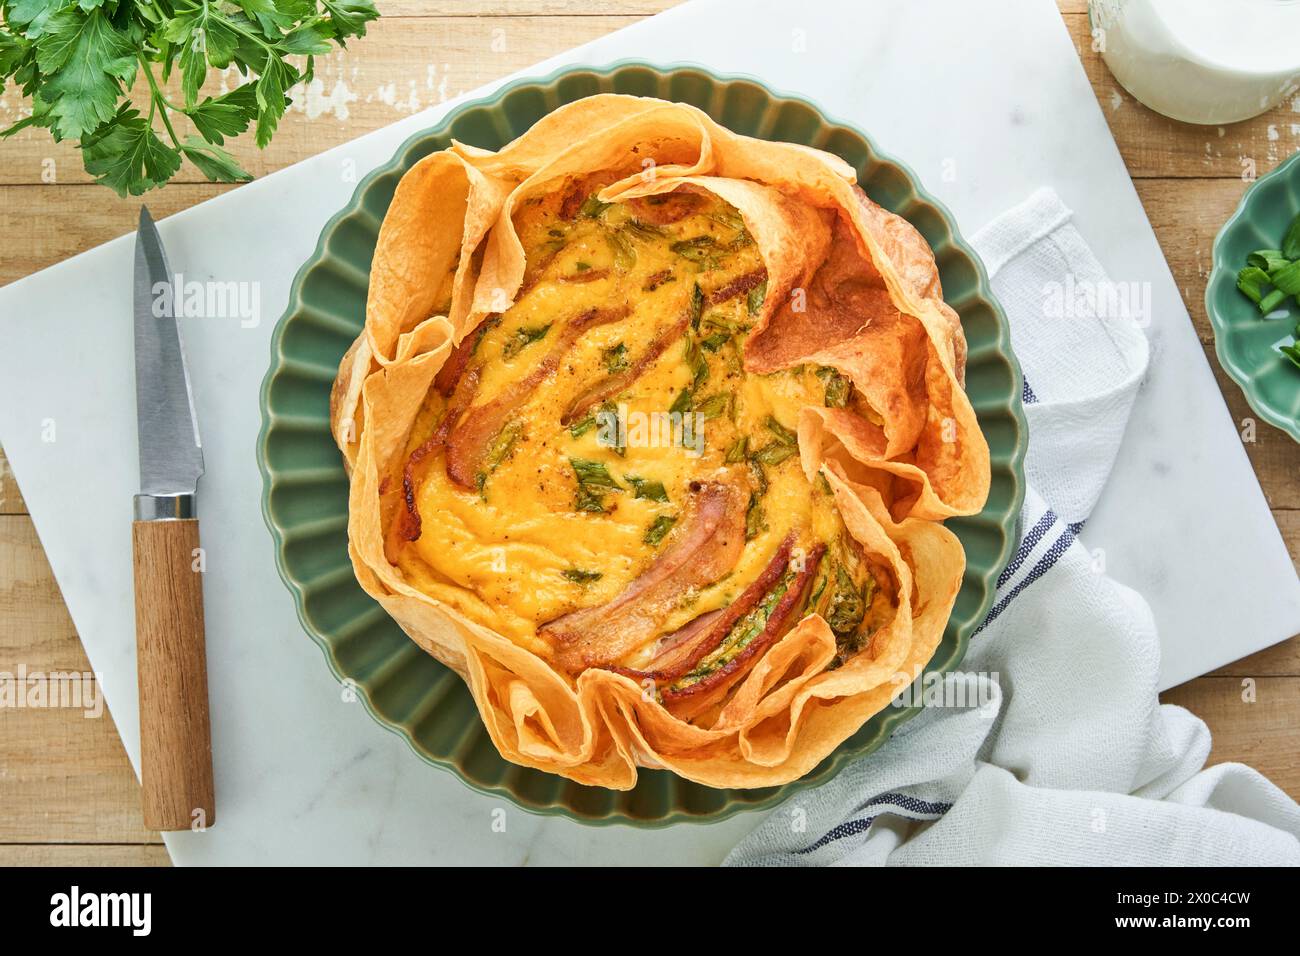 Homemade quiche or tart with slices of bacon and leeks with tortilla instead of dough on wooden cutting board on rustic old wooden background. Quiche Stock Photo